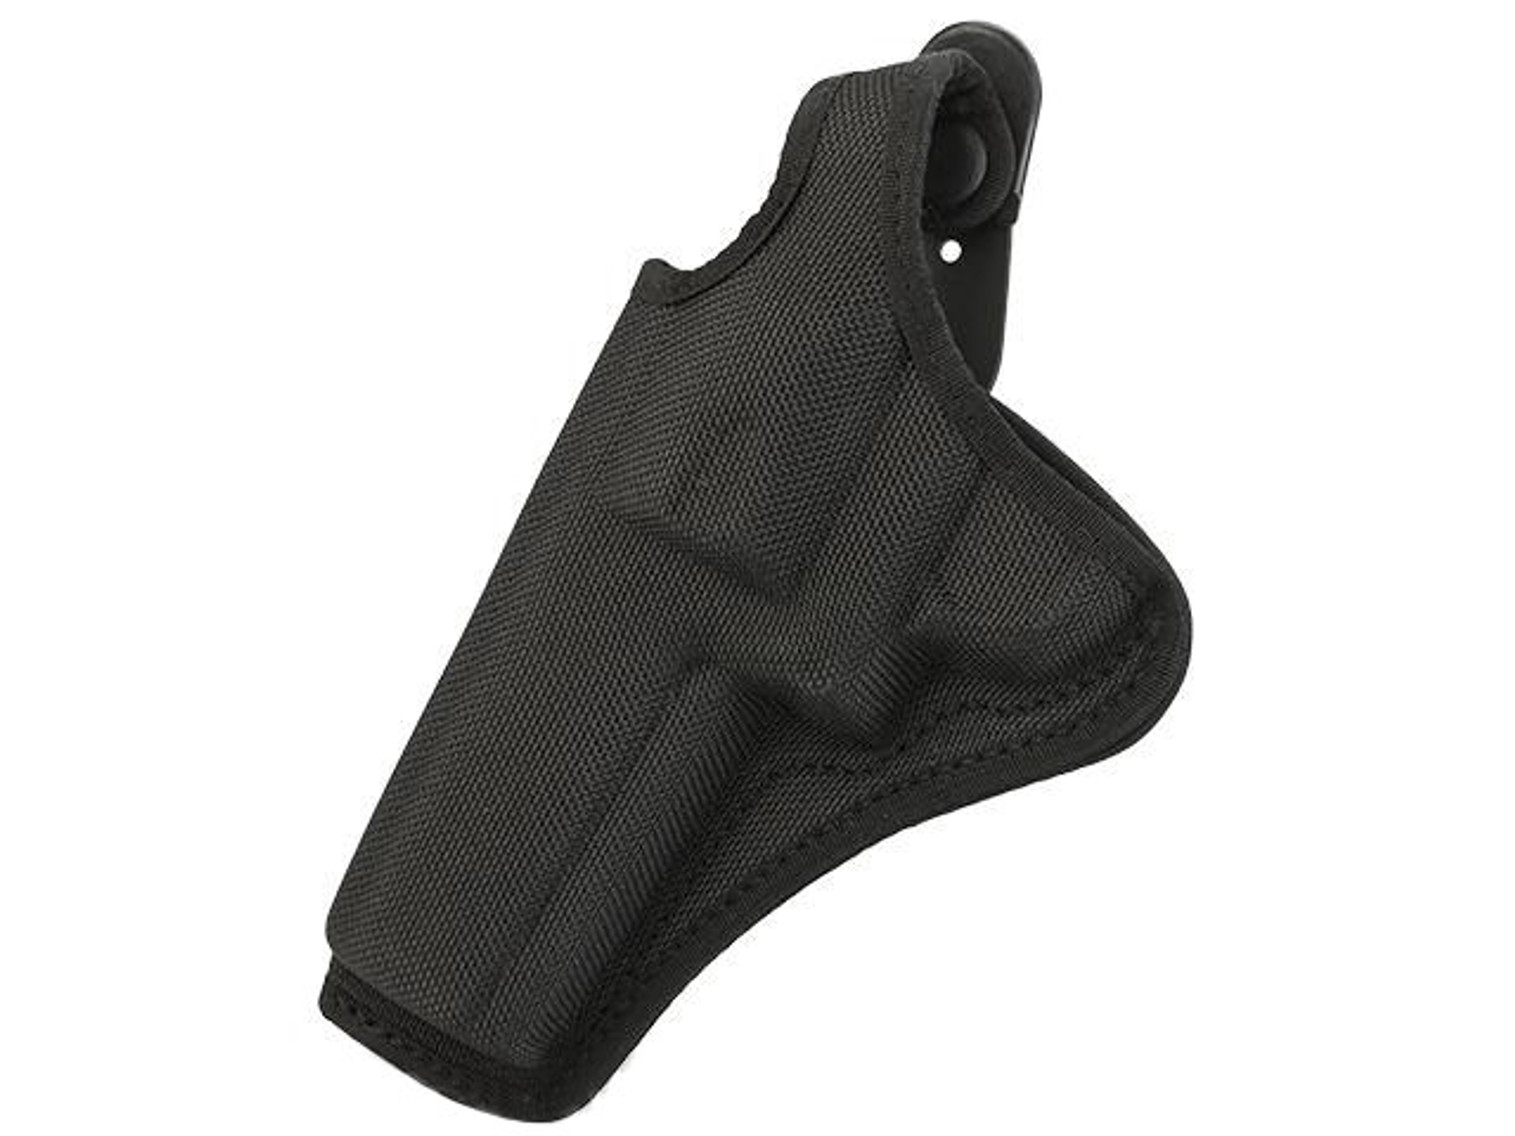 SAFARILAND / BIANCHI AccuMold Belt Clip Holster with Thumbsnap - S&W 629 / N Frame (Left)